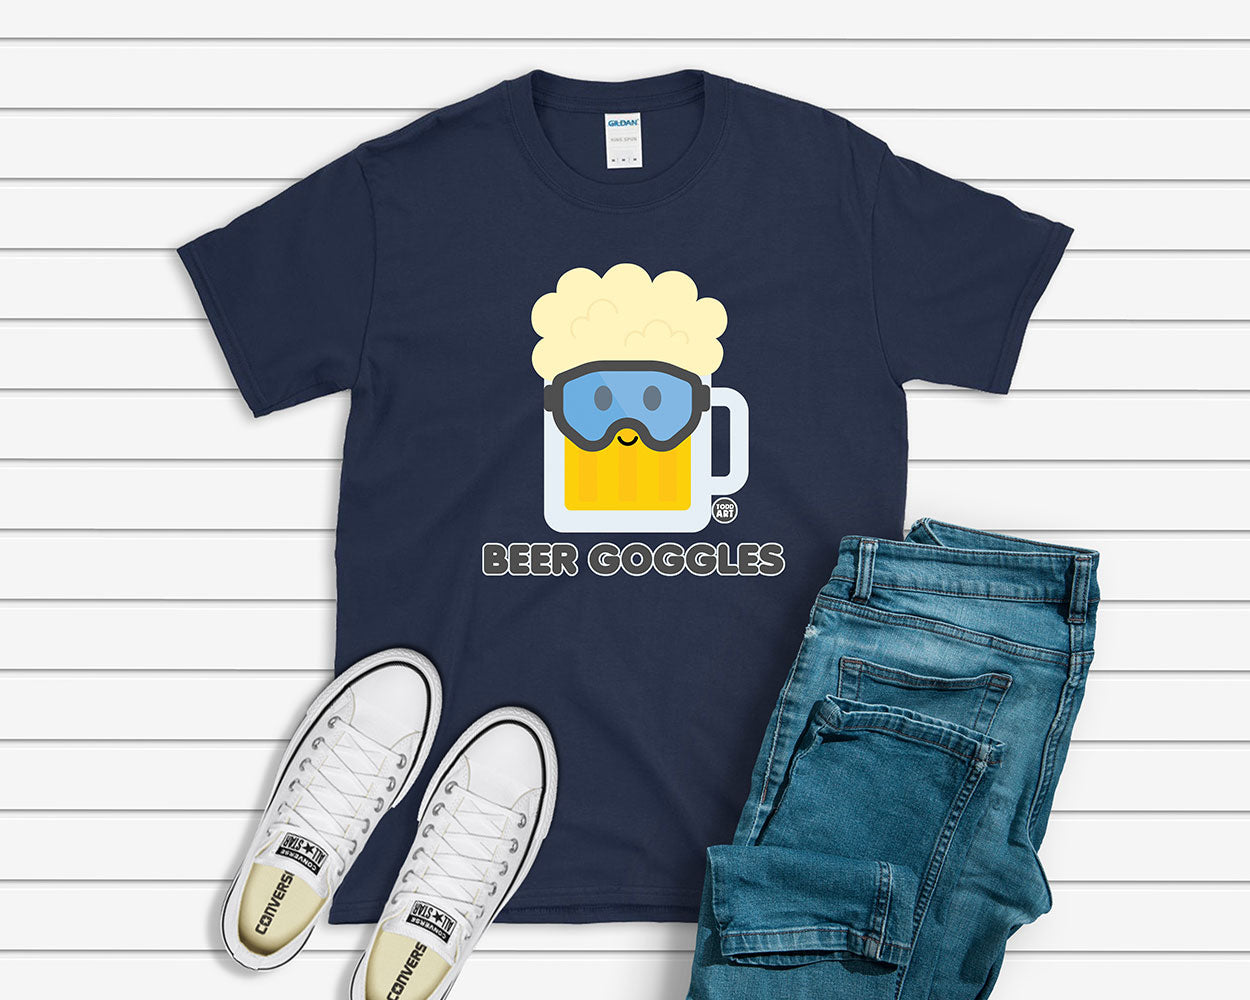 Beer Goggles T-Shirt